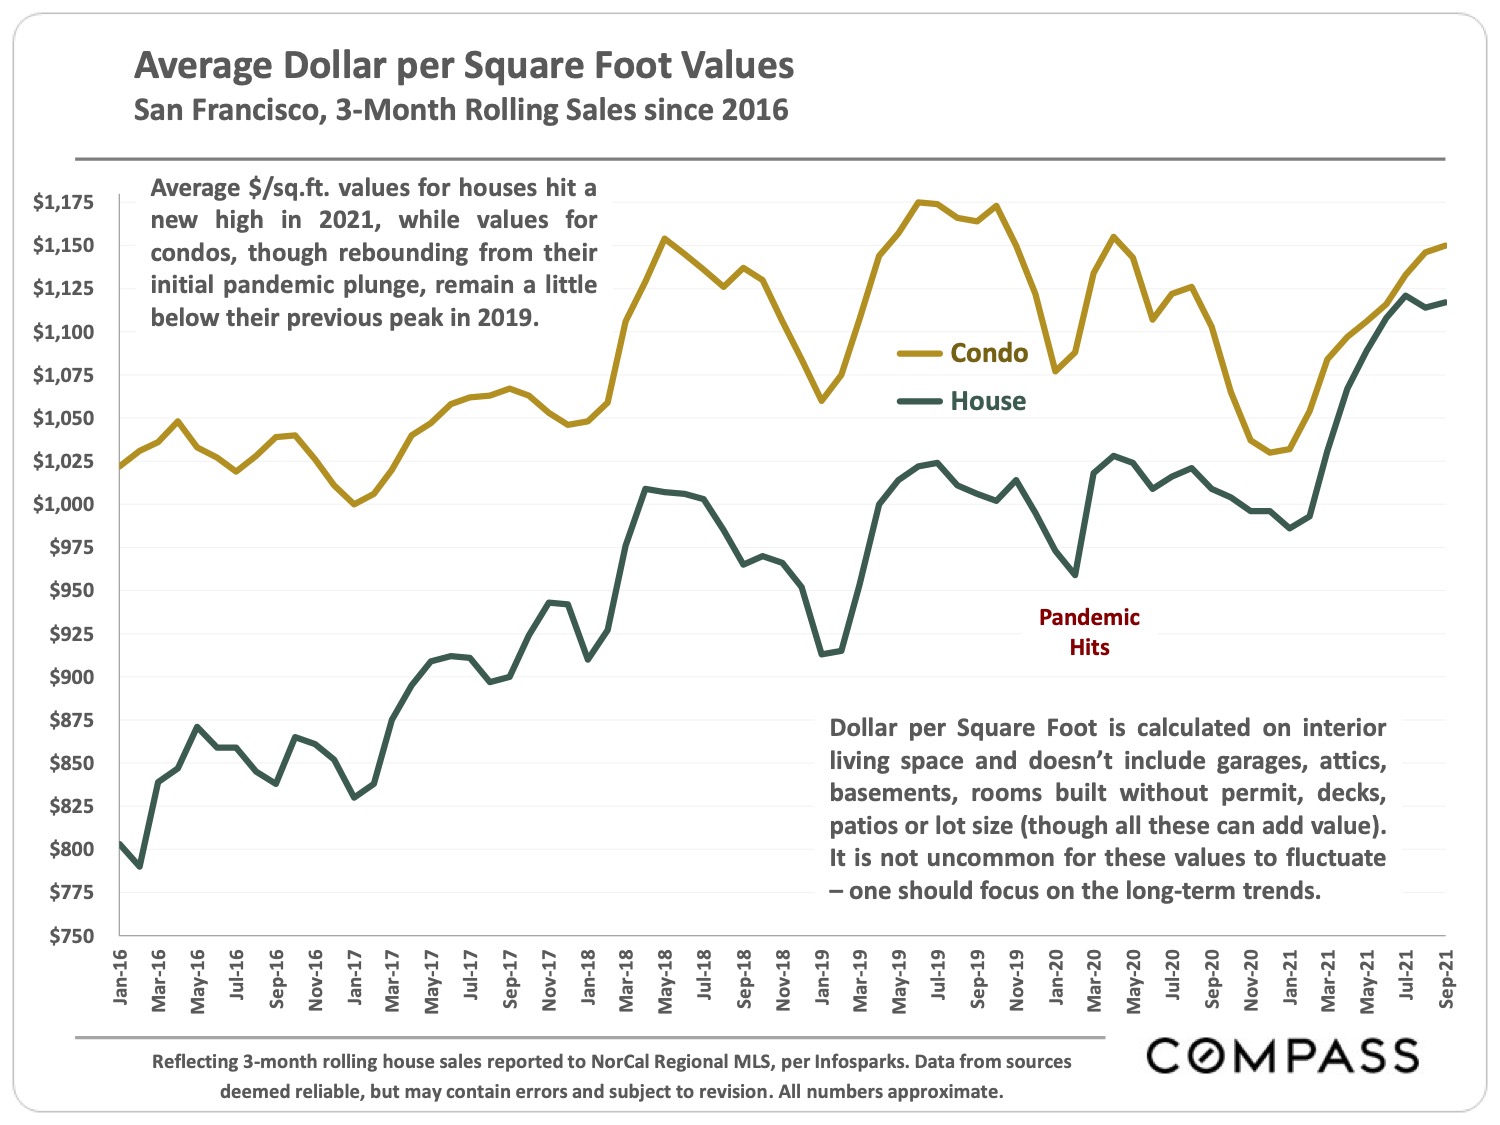 Average Dollar per Square Foot Values - San Francisco, 3 Month Rolling Sales Since 2016